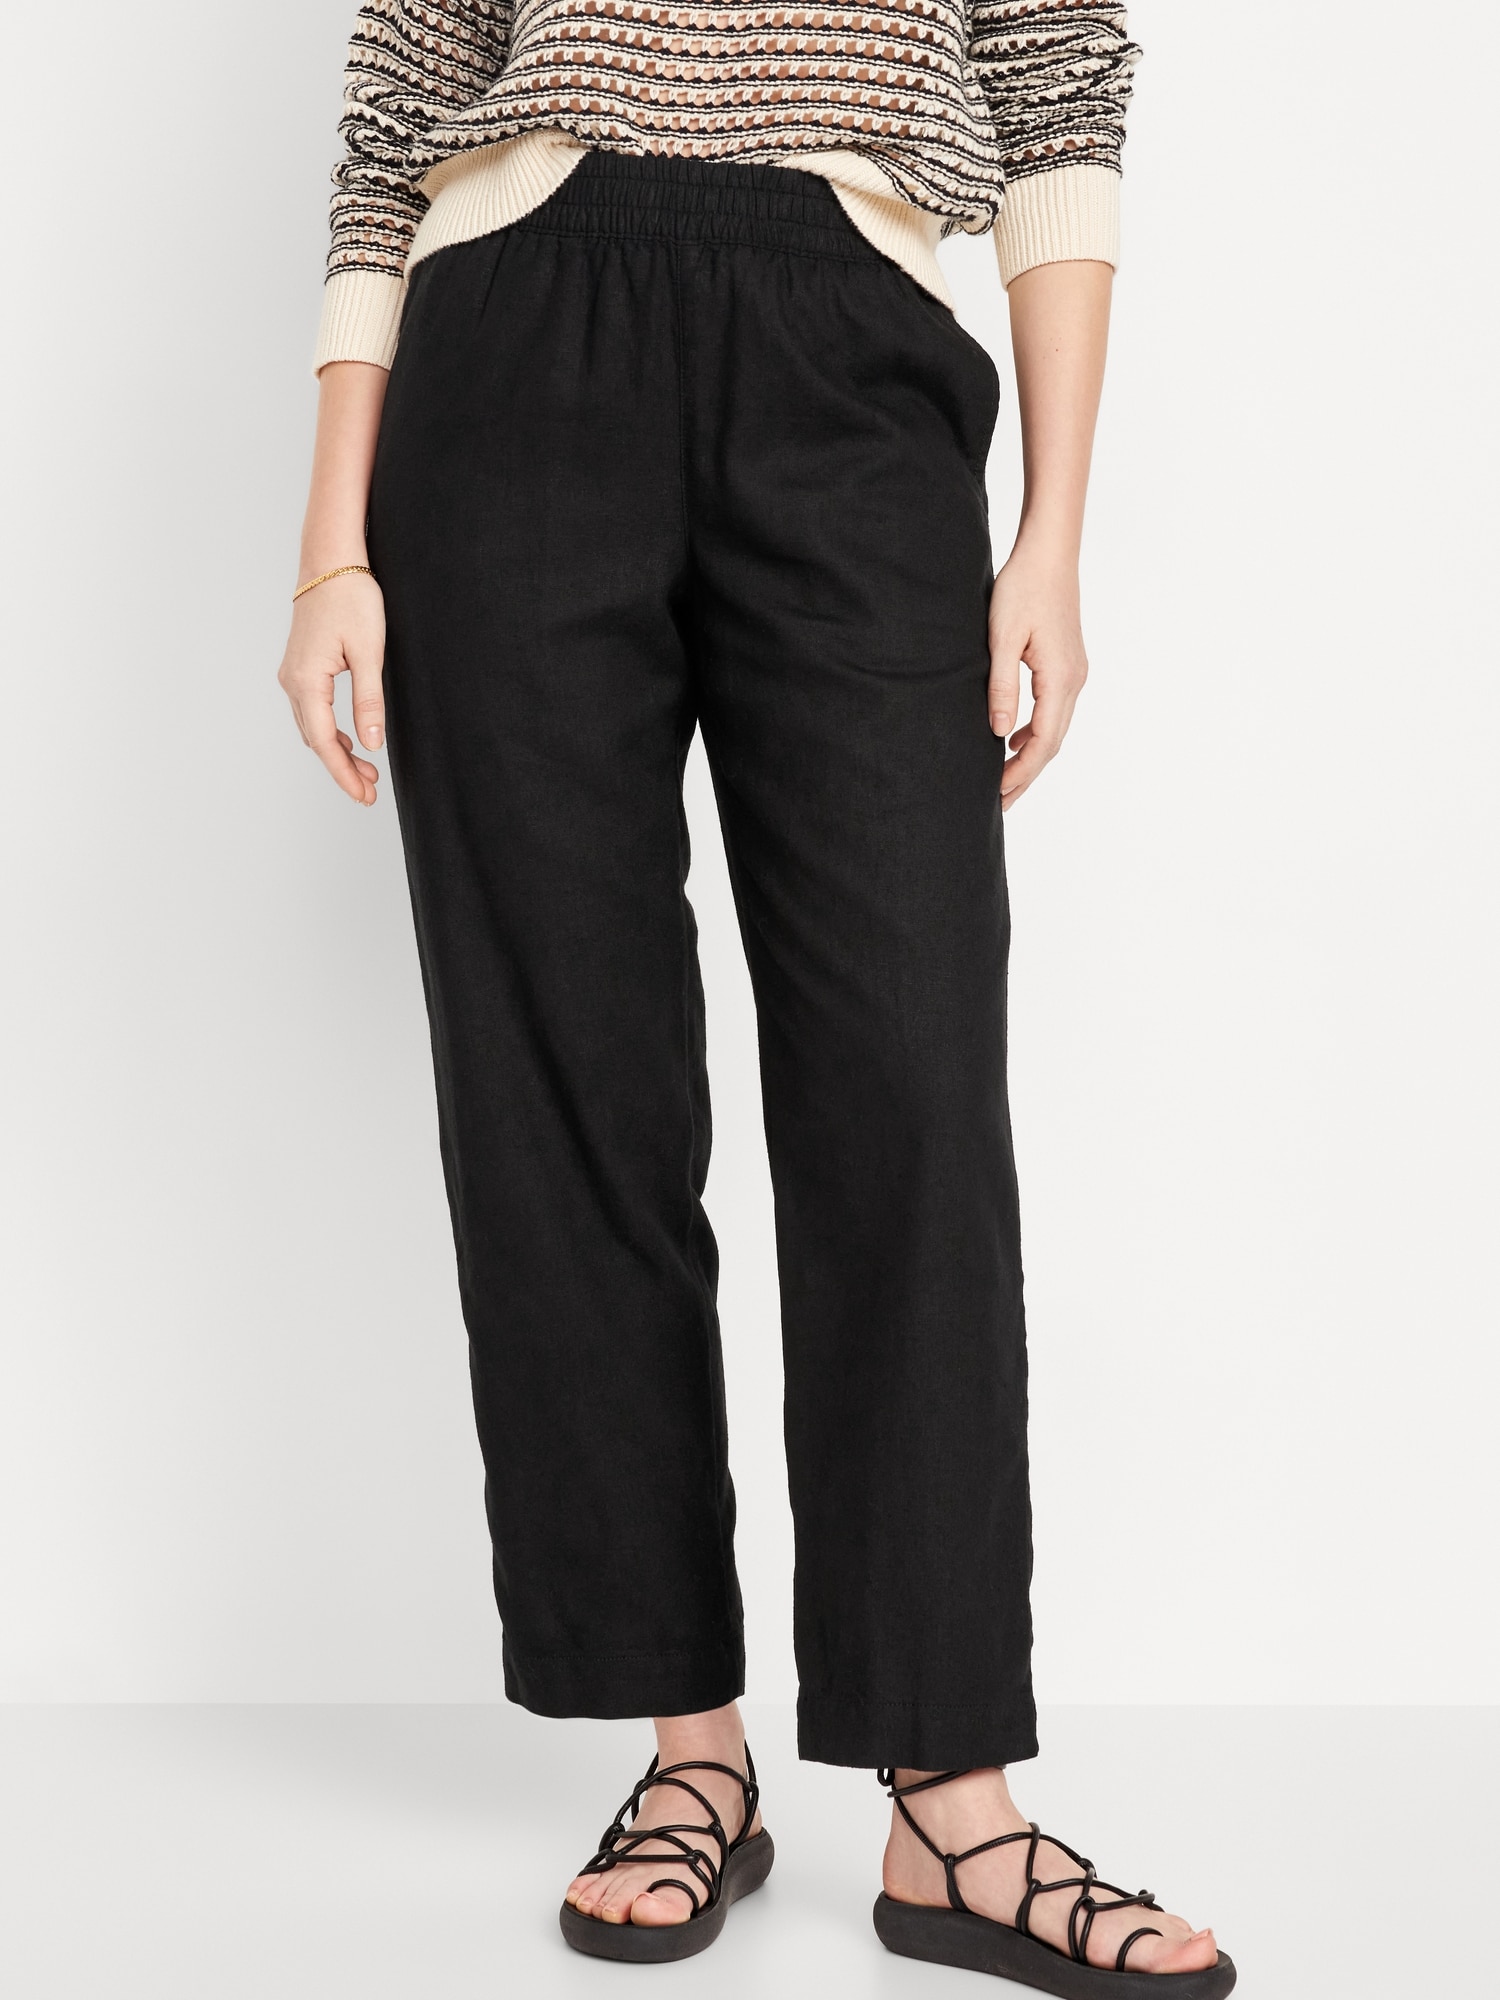 Mid-Rise Pull-On Wide-Leg Soft Pants for Women | Old Navy